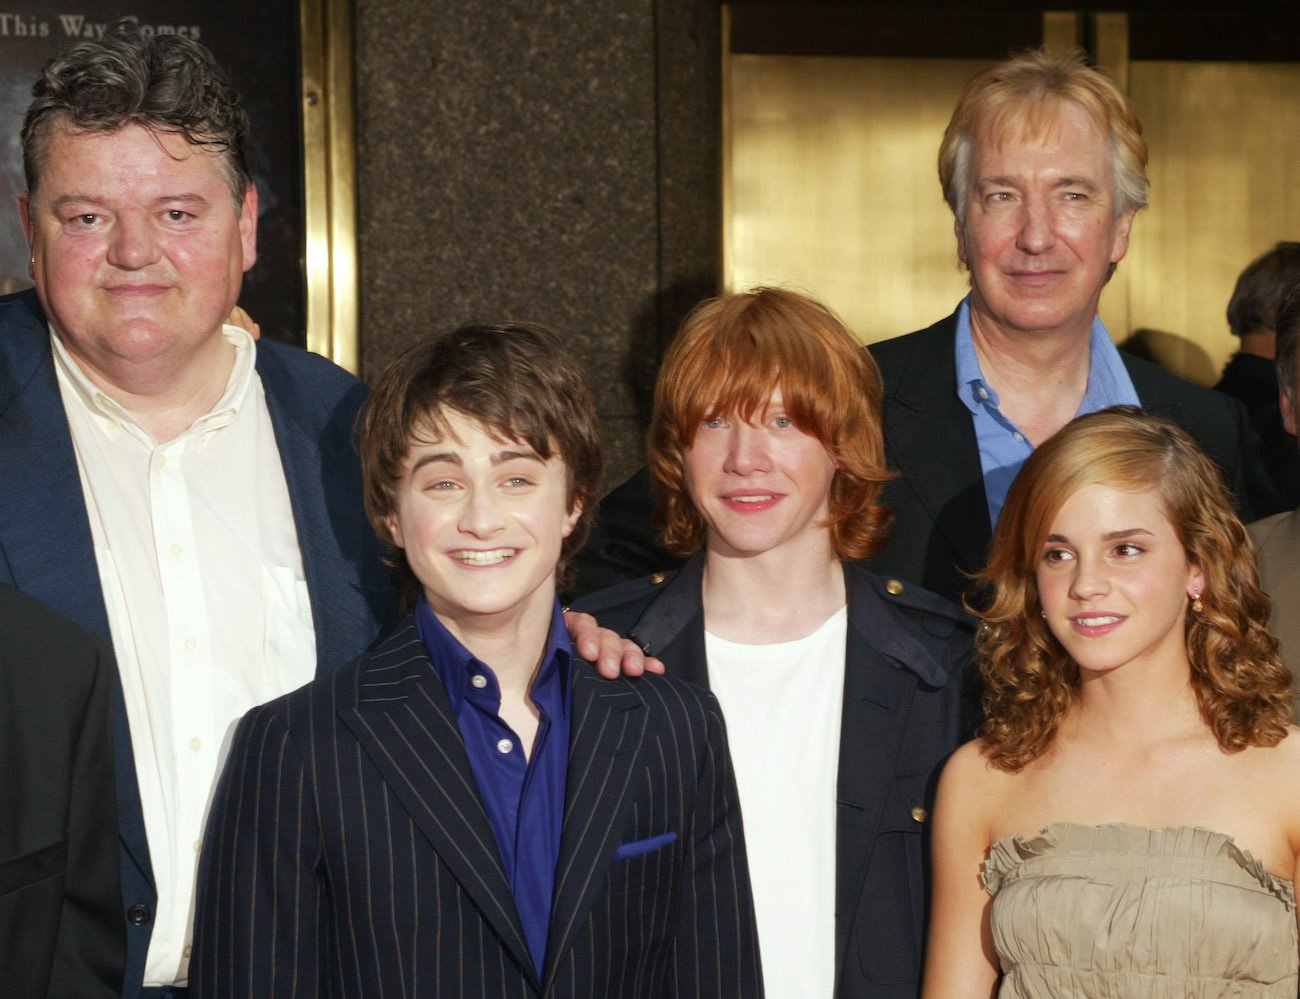 Robbie Coltrane, Daniel Radcliffe, Rupert Grint, Emma Watson, Alan Rickman, who helped orchestrate one of the Radcliffe's favorite pranks on the set of 'Harry Potter'